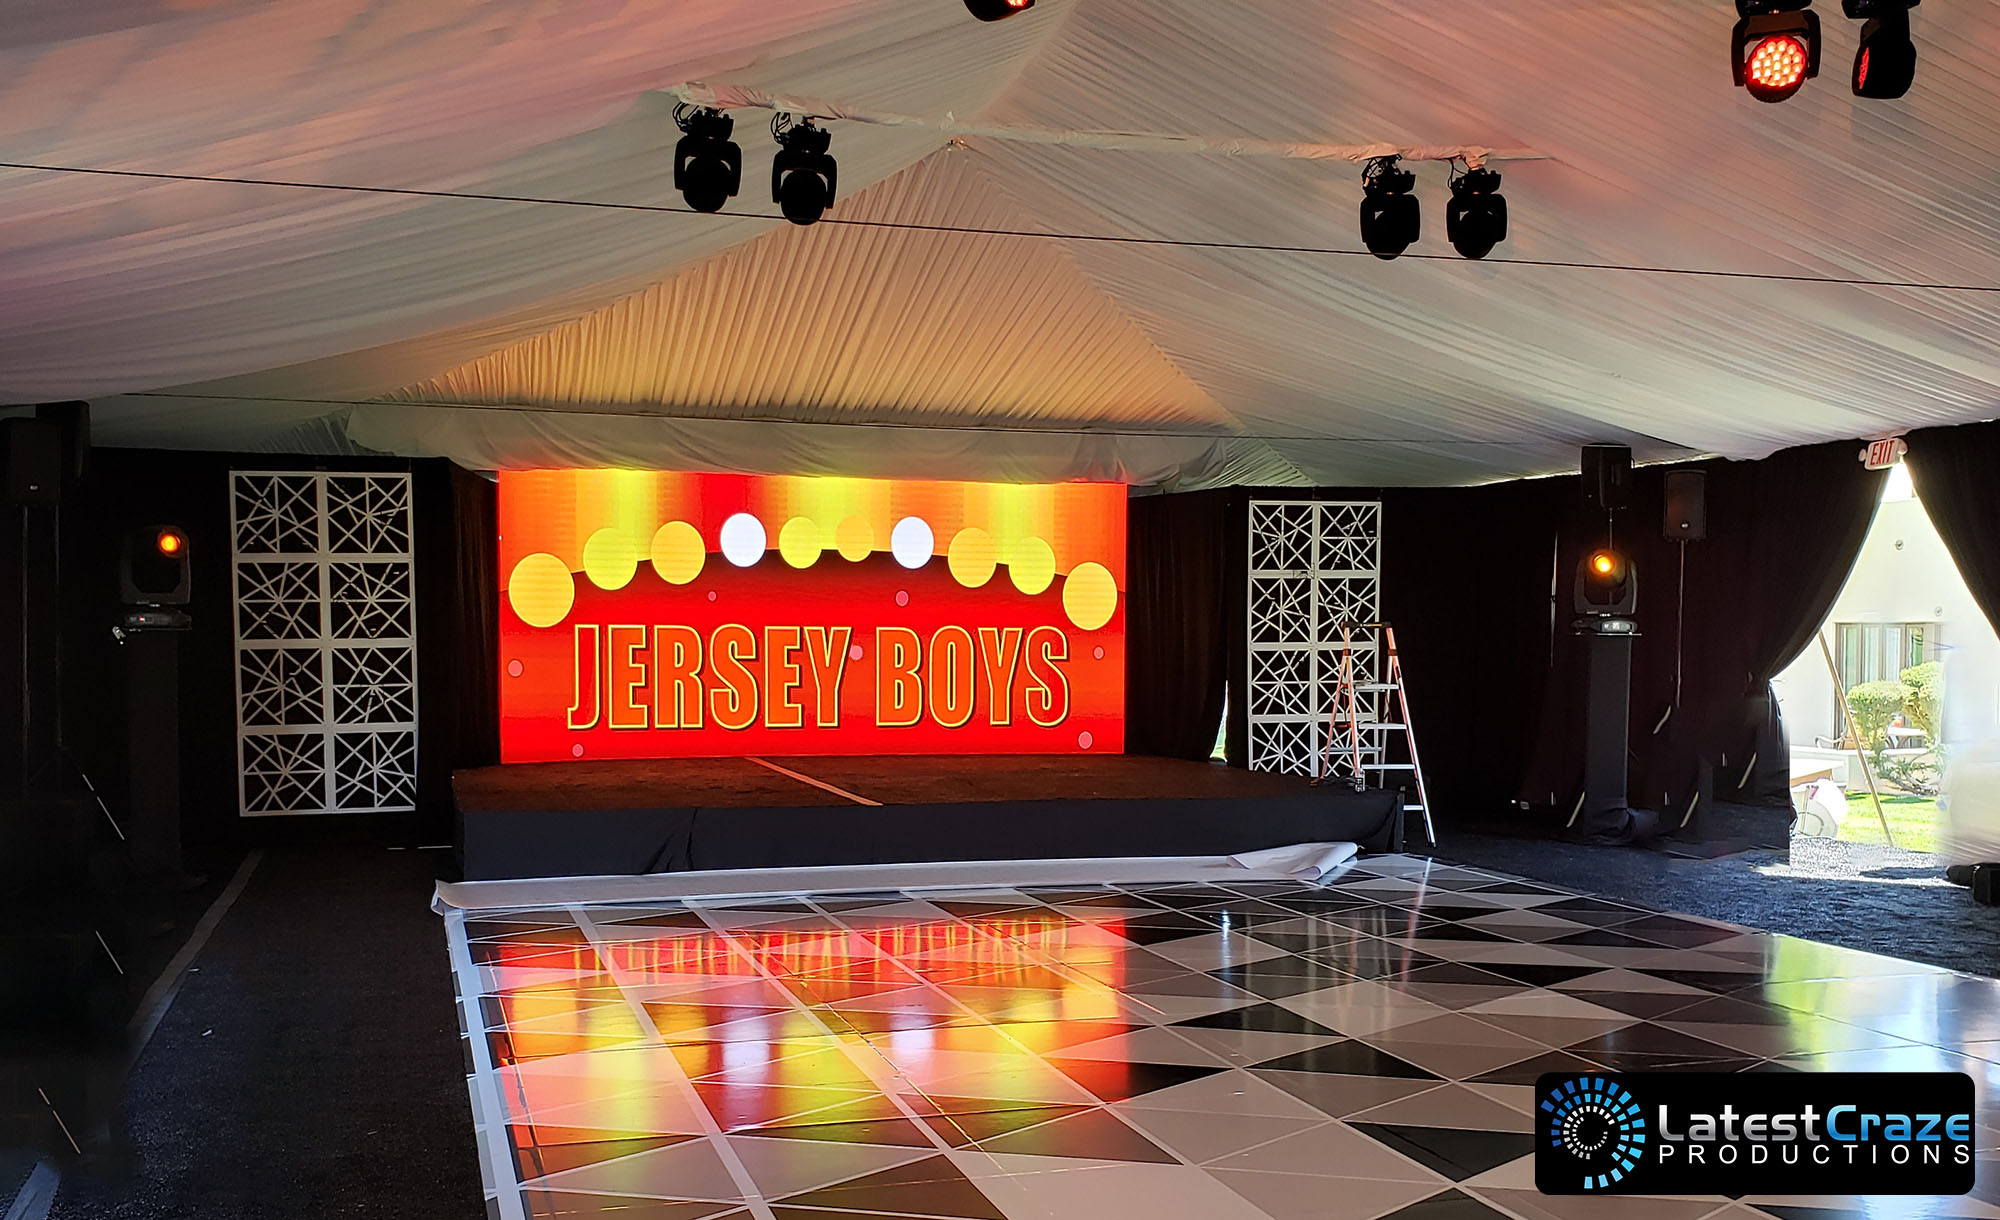 led video wall stage backdrop in tent Latest Craze Productions